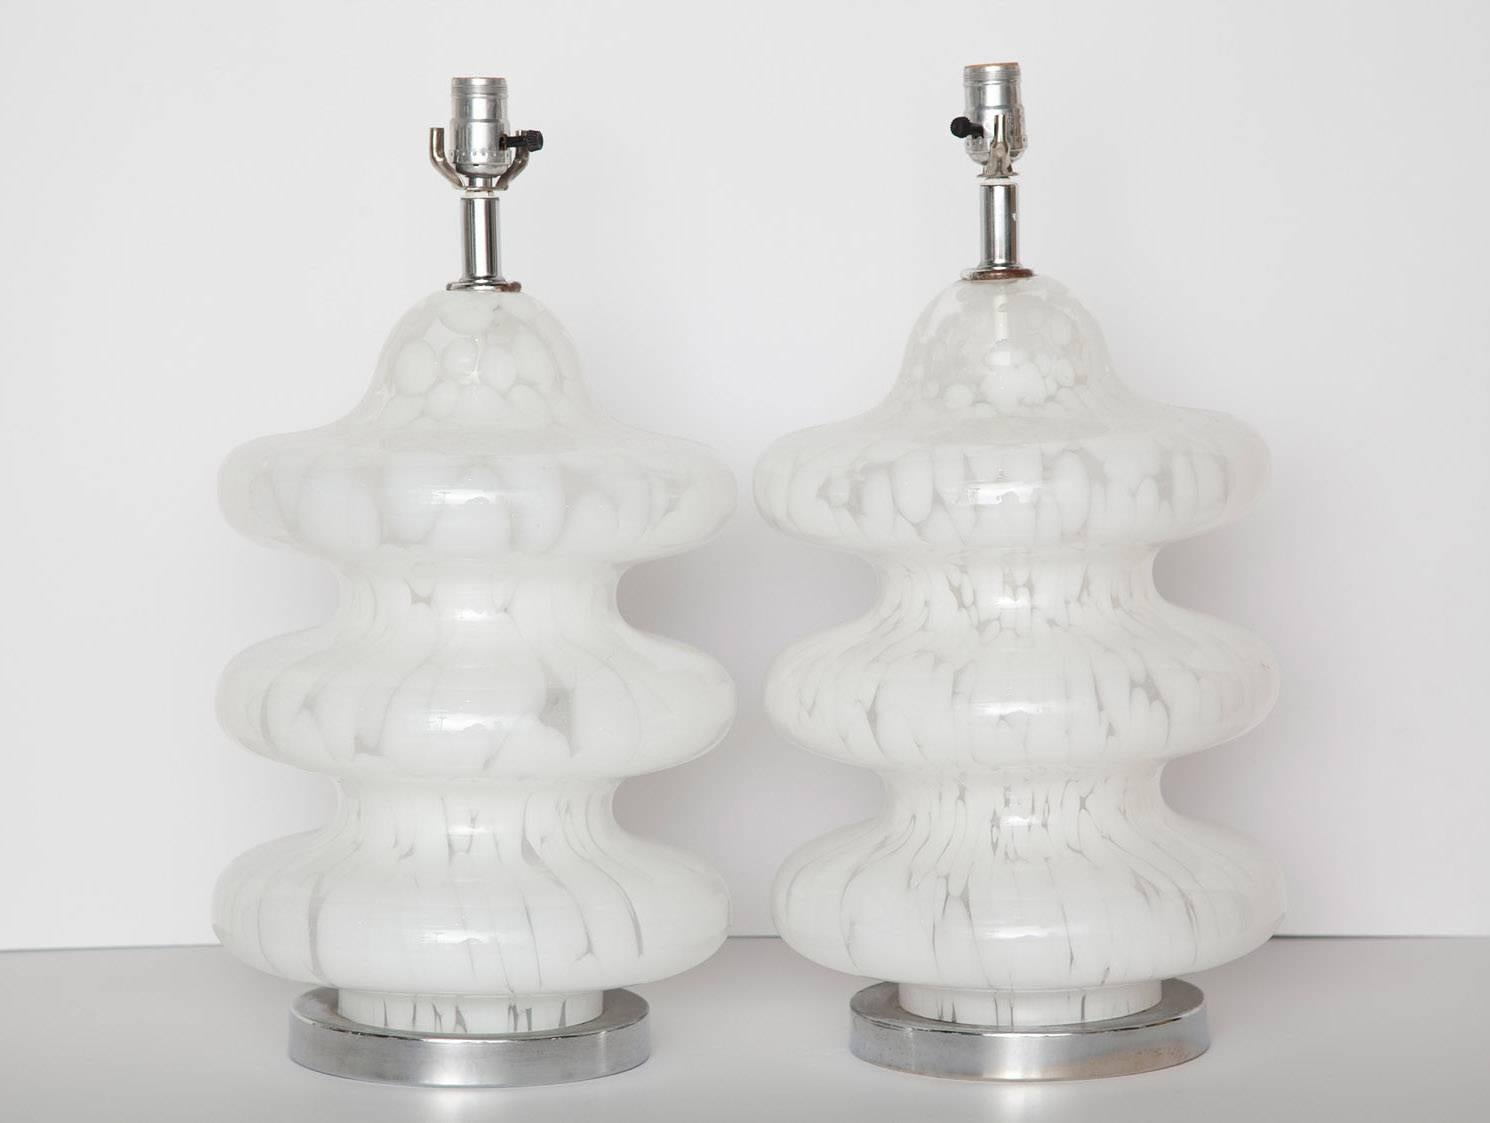 Nicely-scaled vintage table lamps in white and clear mottled Murano glass, Italy, circa 1970. Original chromed hardware and wiring. Height measurement below is to top of socket.